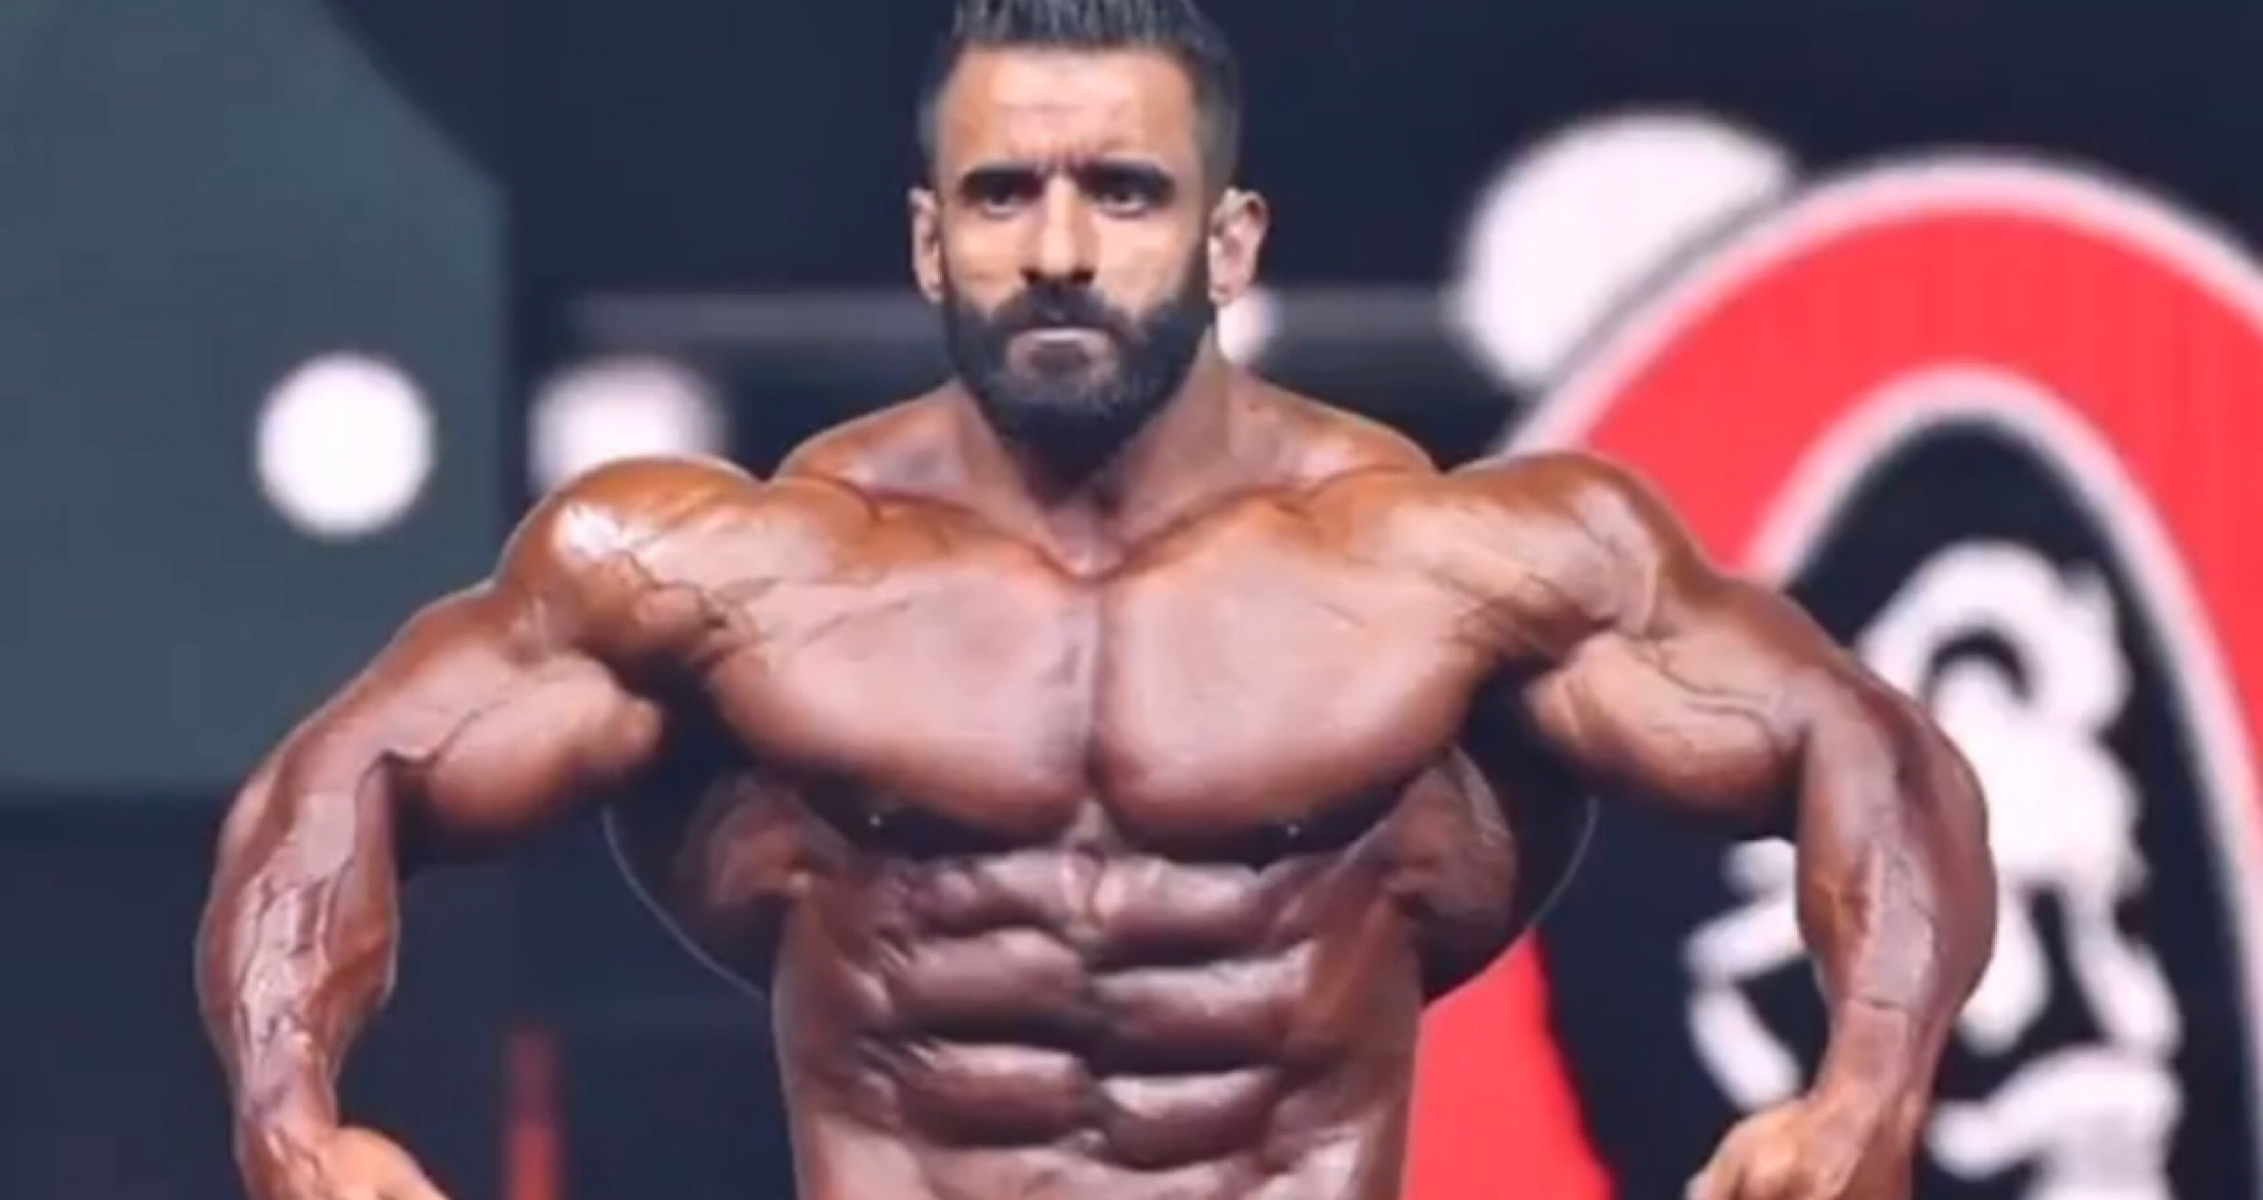 Bodybuilding Legends Agree, Hadi Choopan Had Best Conditioning at Olympia